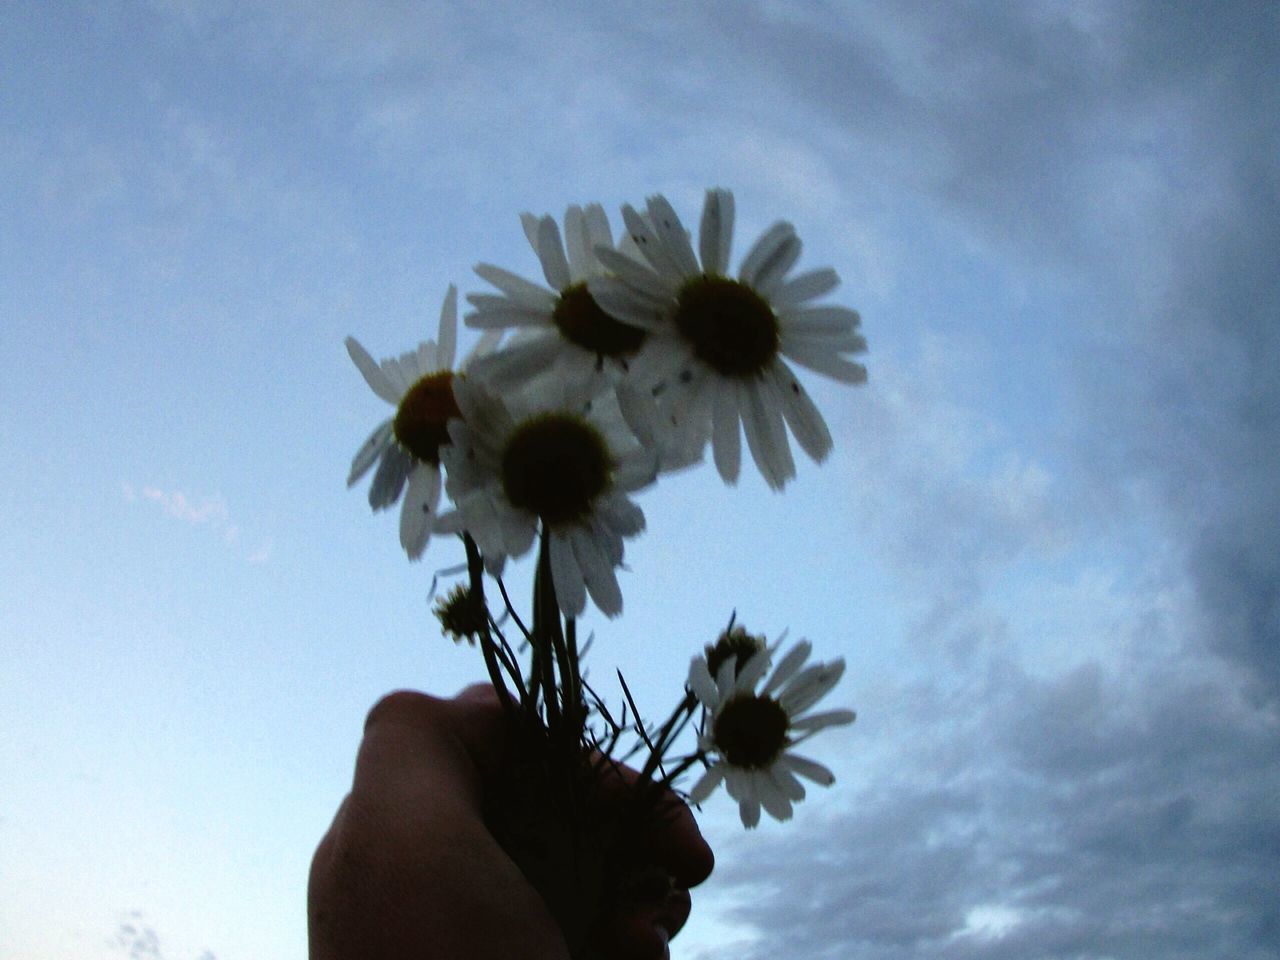 person, flower, holding, part of, sky, fragility, low angle view, cropped, unrecognizable person, human finger, petal, flower head, freshness, personal perspective, single flower, close-up, cloud - sky